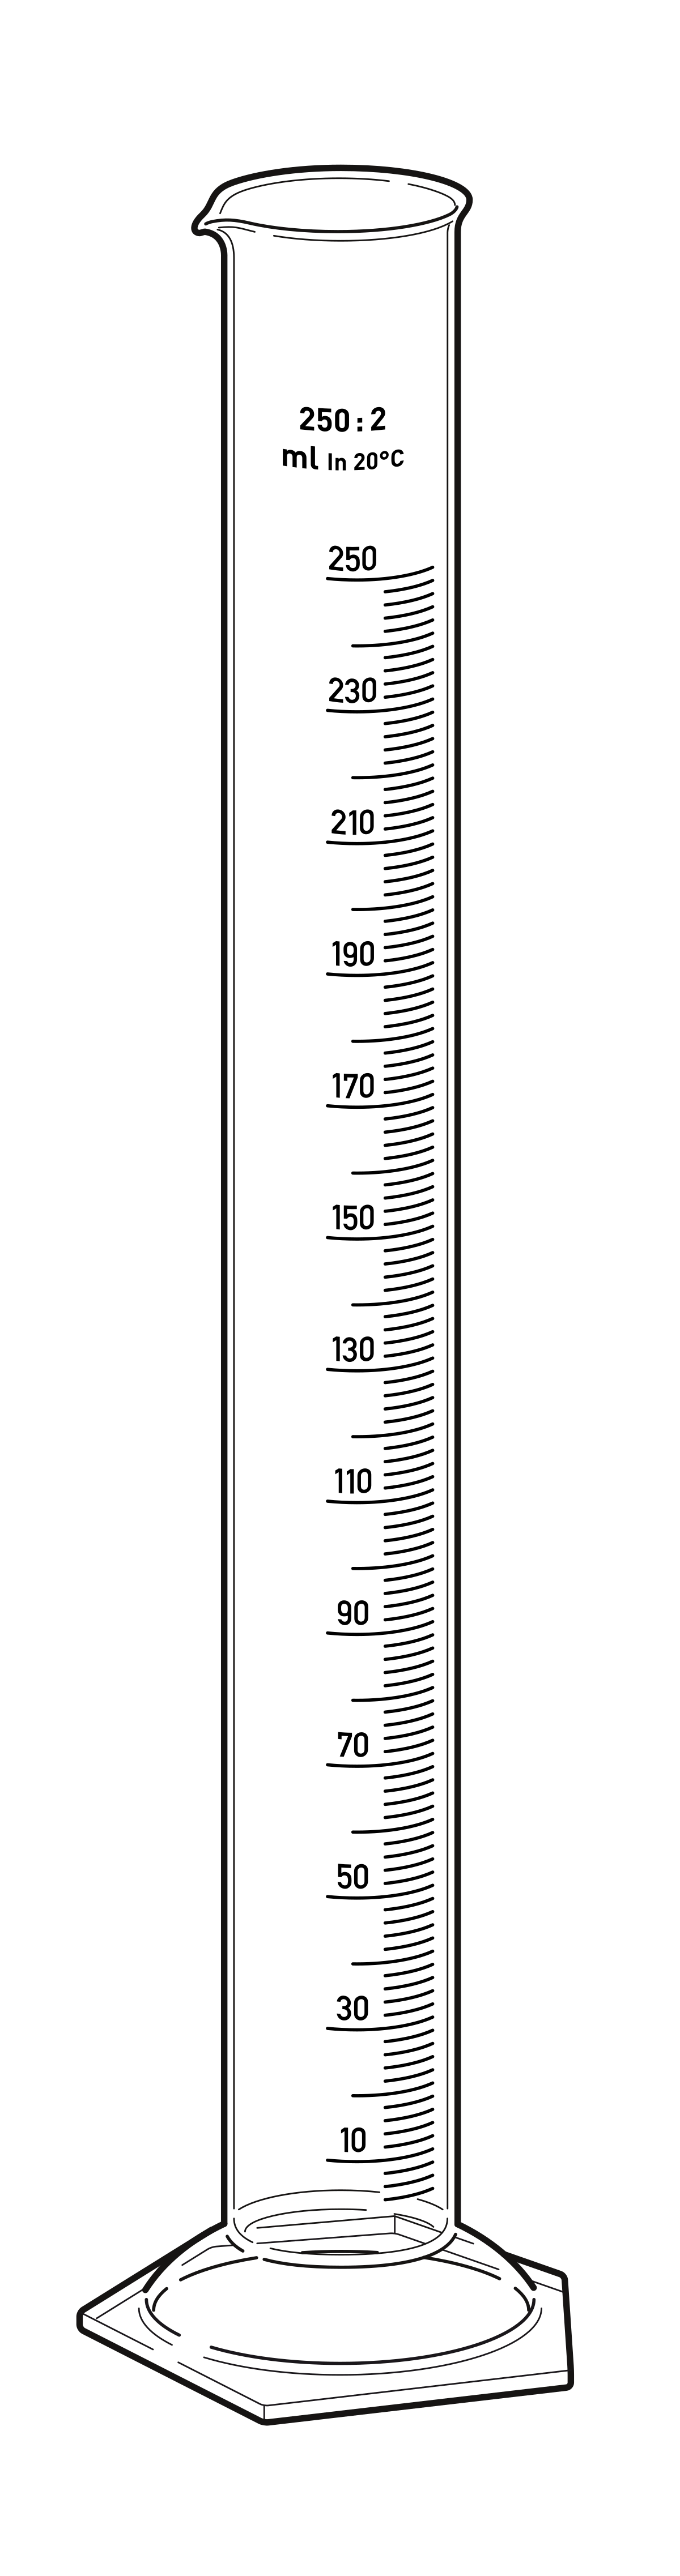 File:Graduated Cylinder tall form 250ml.svg - Wikimedia Commons